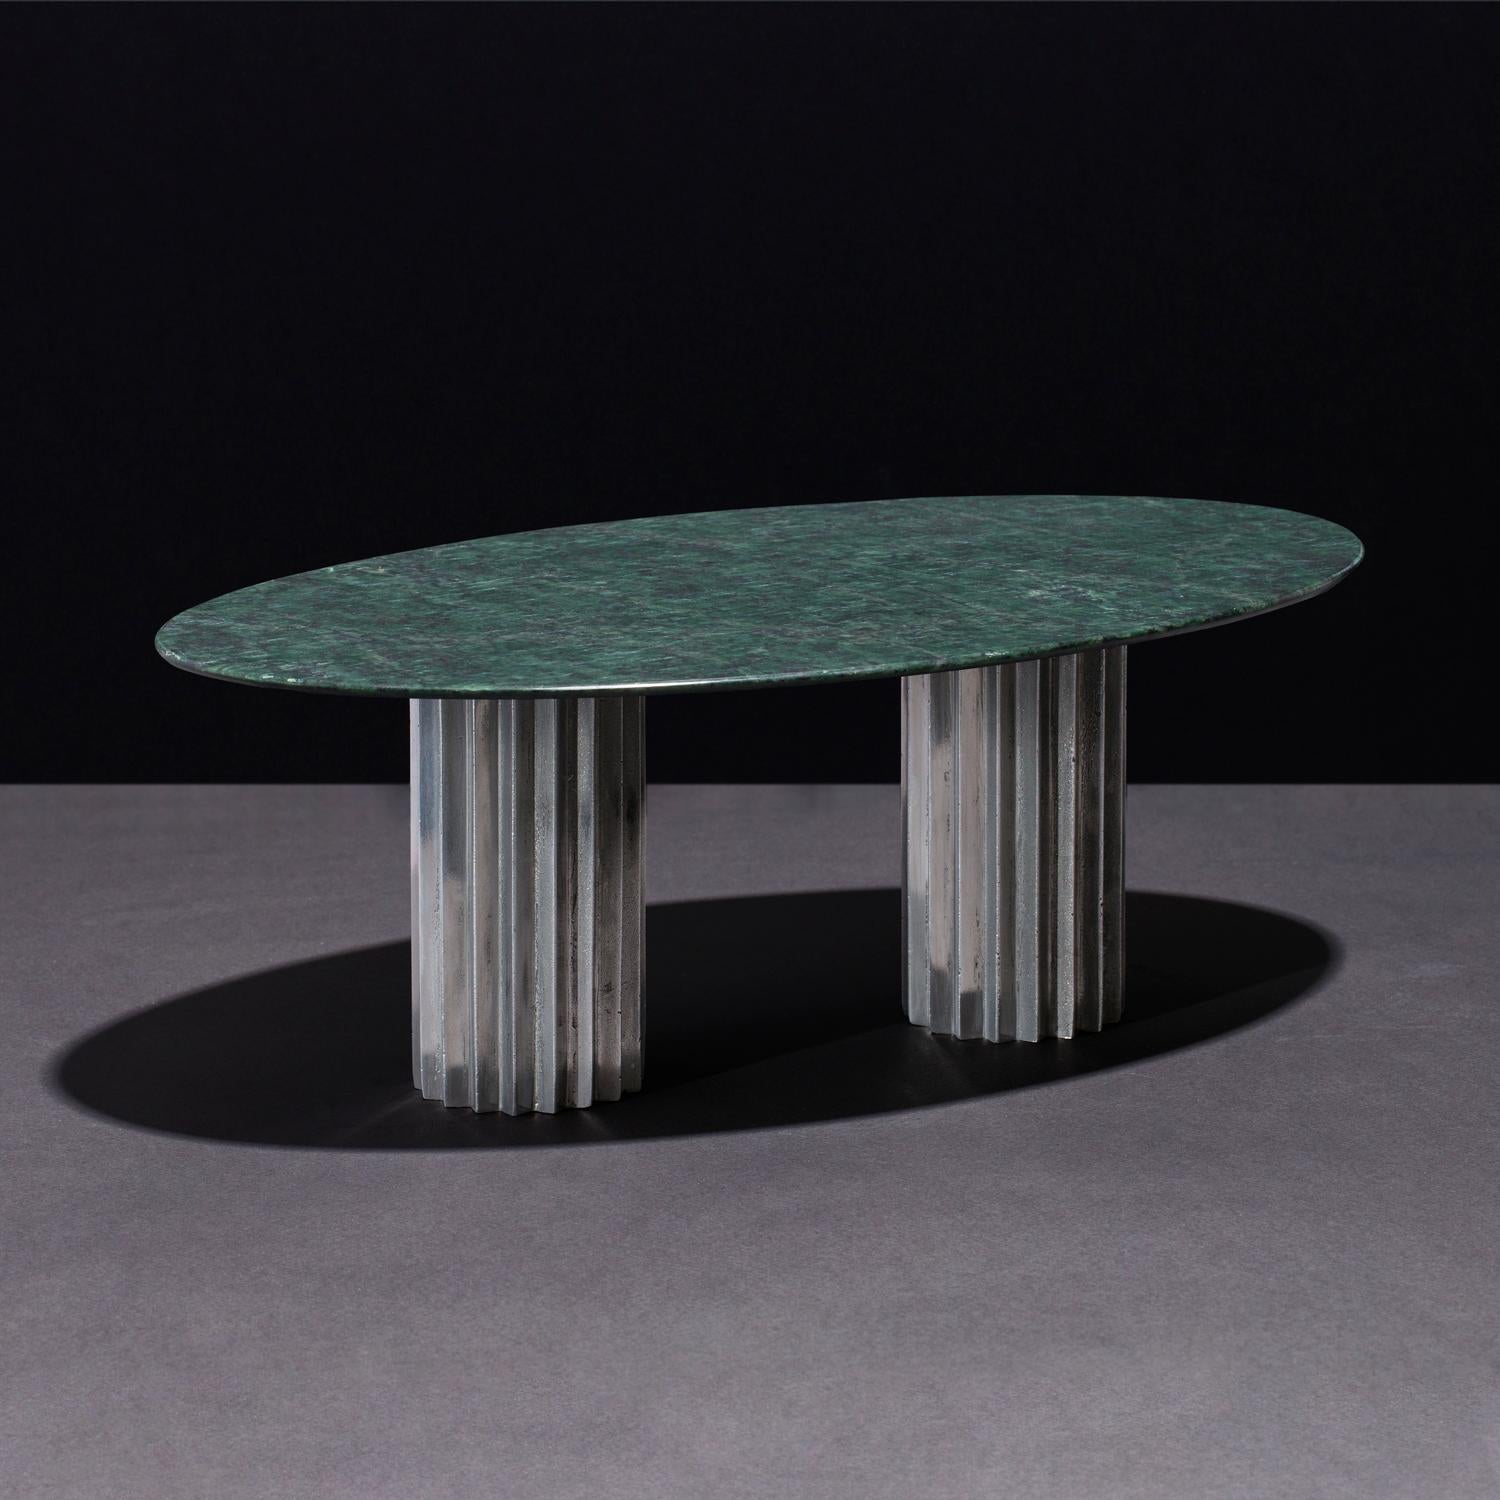 Doris Green Serpentino Marble Oval Dining Table by Fred and Juul
Dimensions: D 130 x W 220 x H 74 cm.
Materials: Aluminum and Green Serpentino marble.

Available in round, oval and rectangular shapes. Also available in different materials. Custom